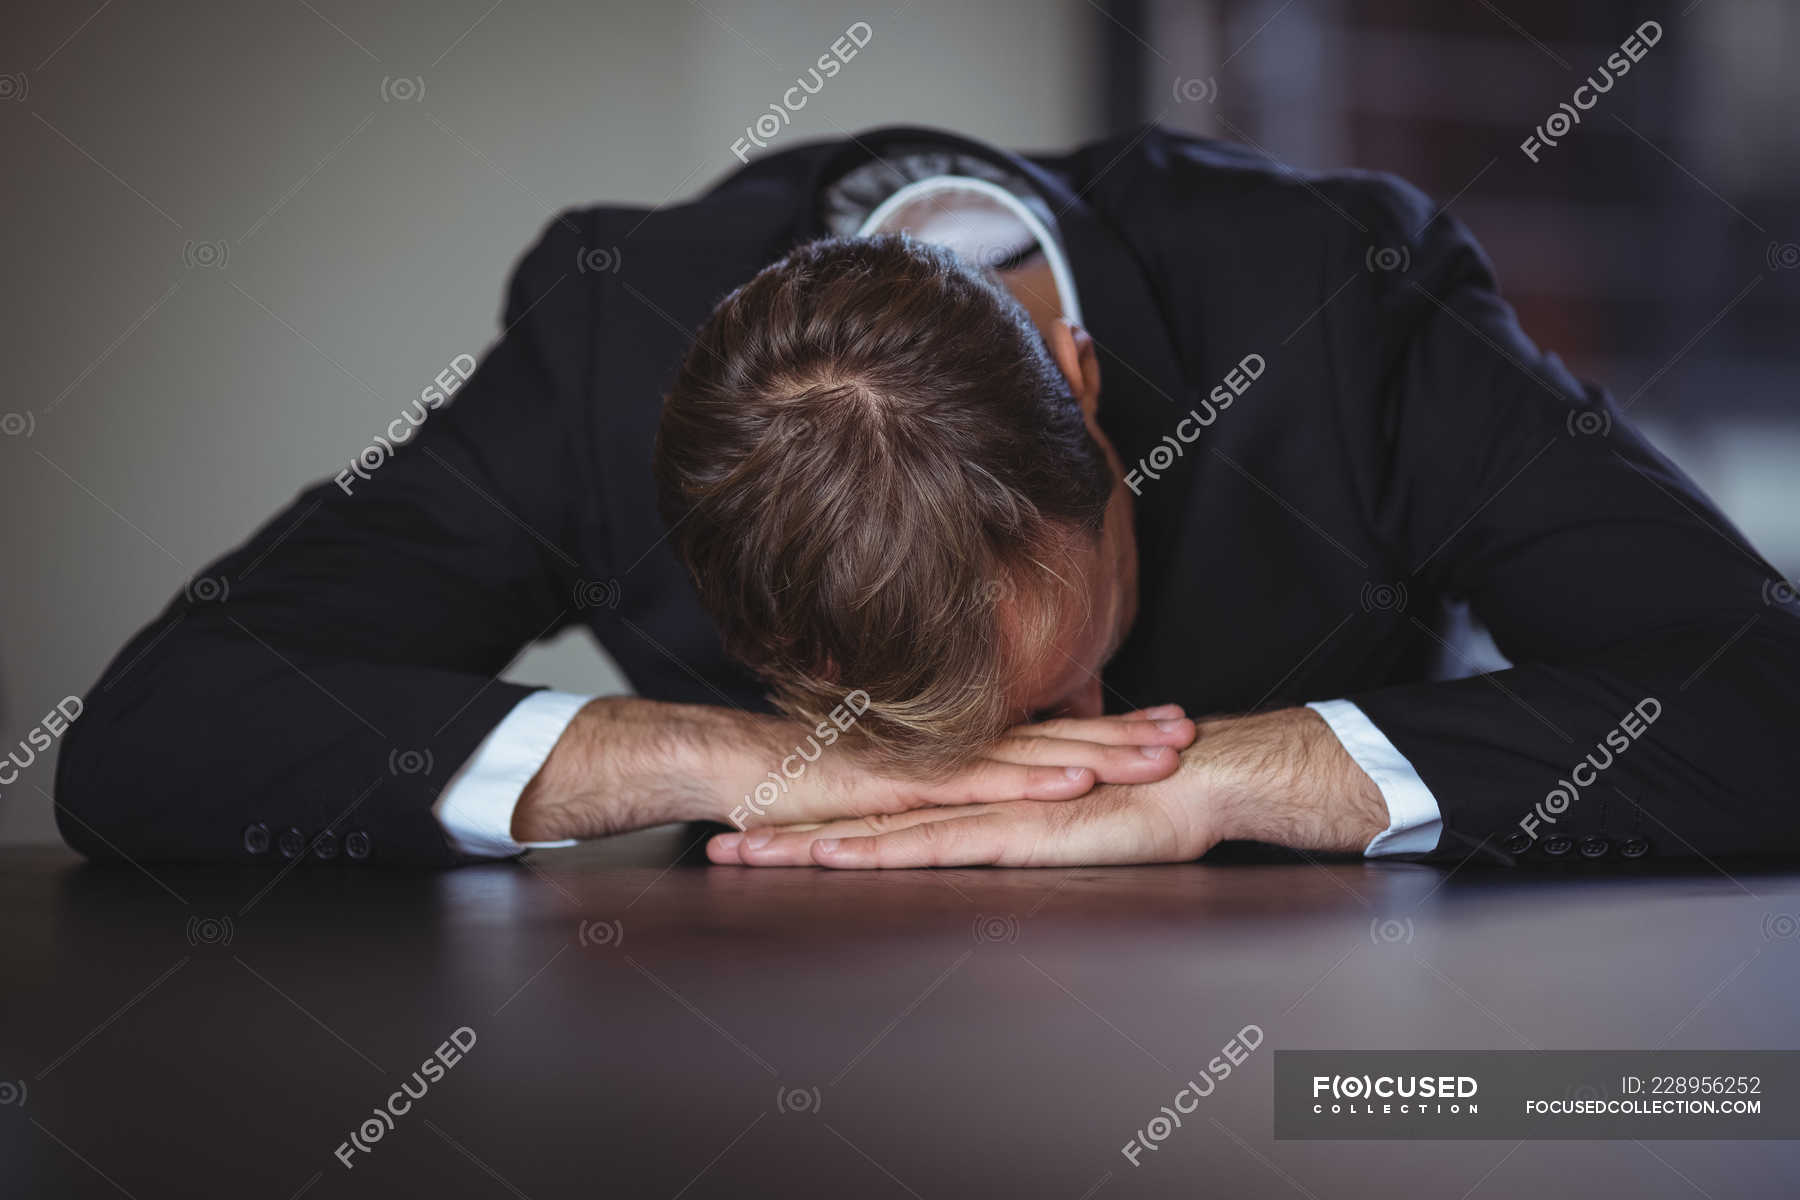 Exhausted Businessman Sitting With His Head Down On Office Desk